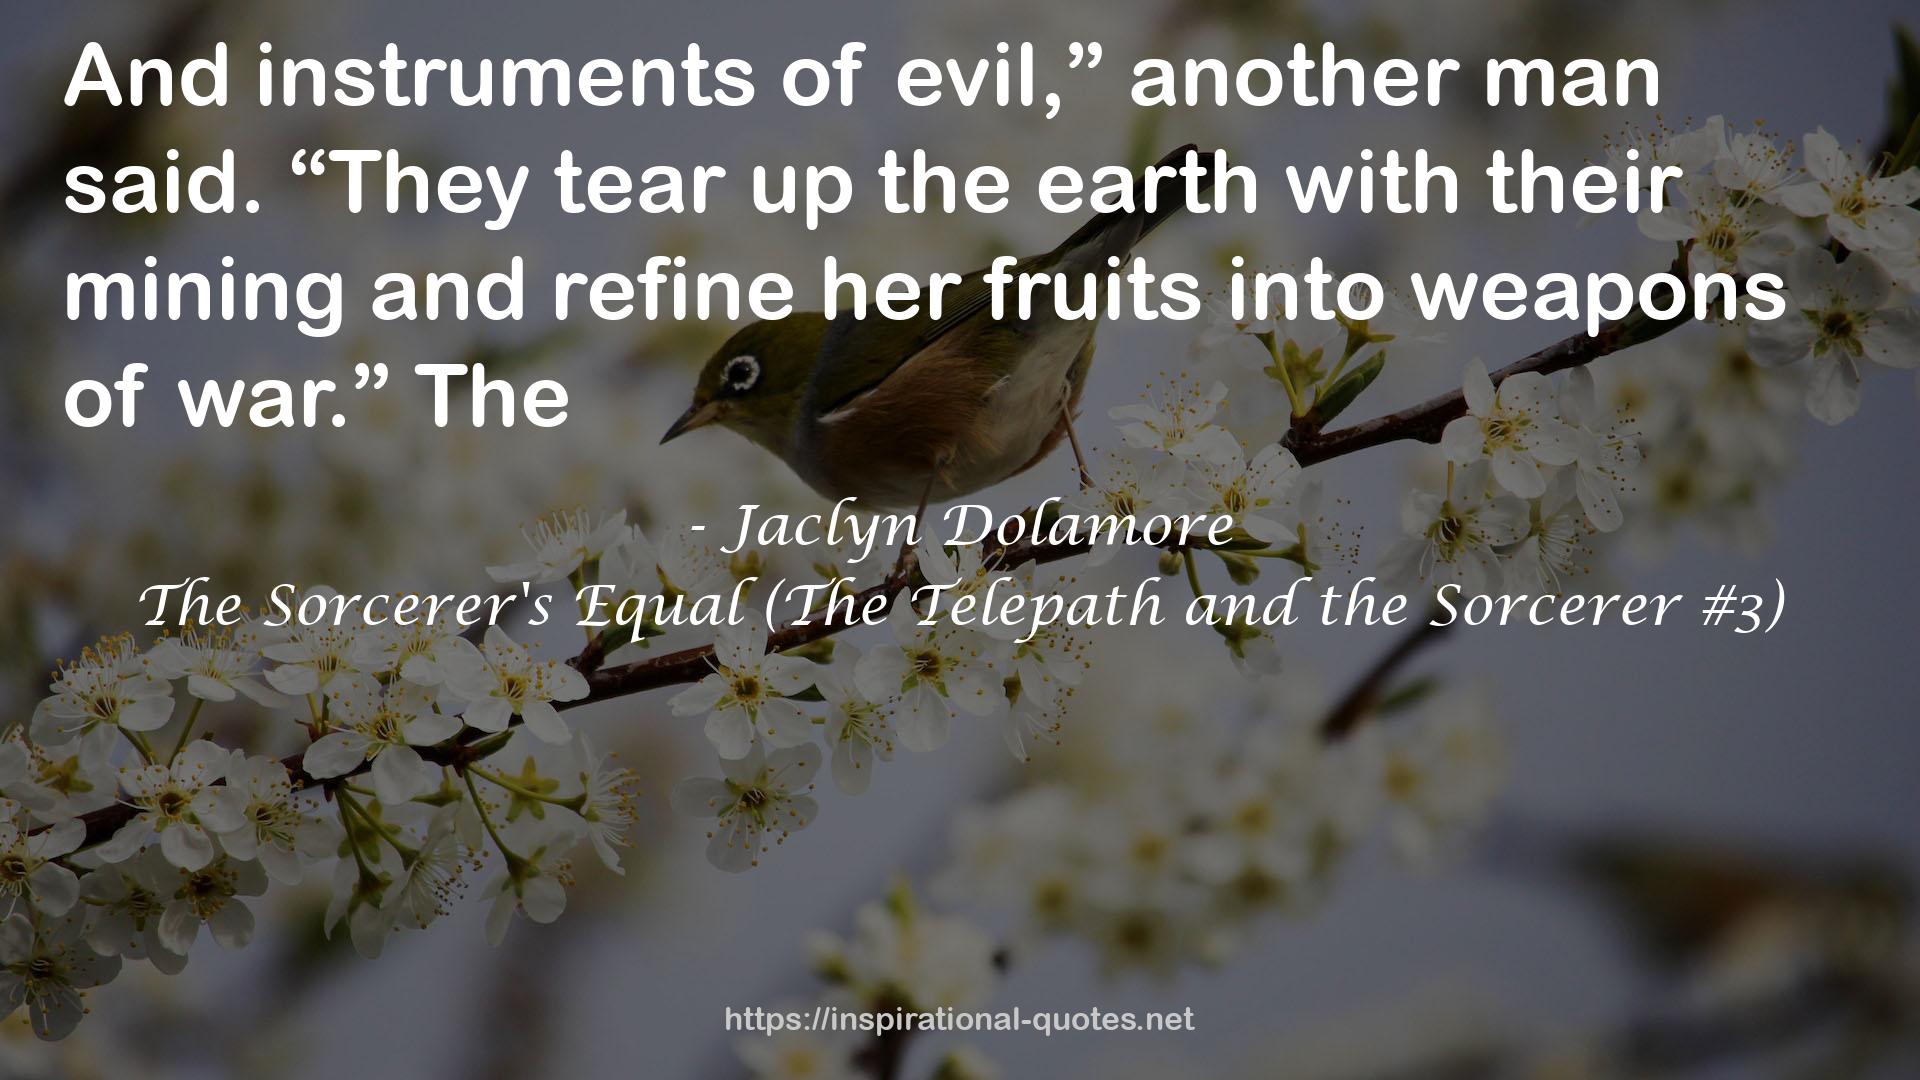 The Sorcerer's Equal (The Telepath and the Sorcerer #3) QUOTES